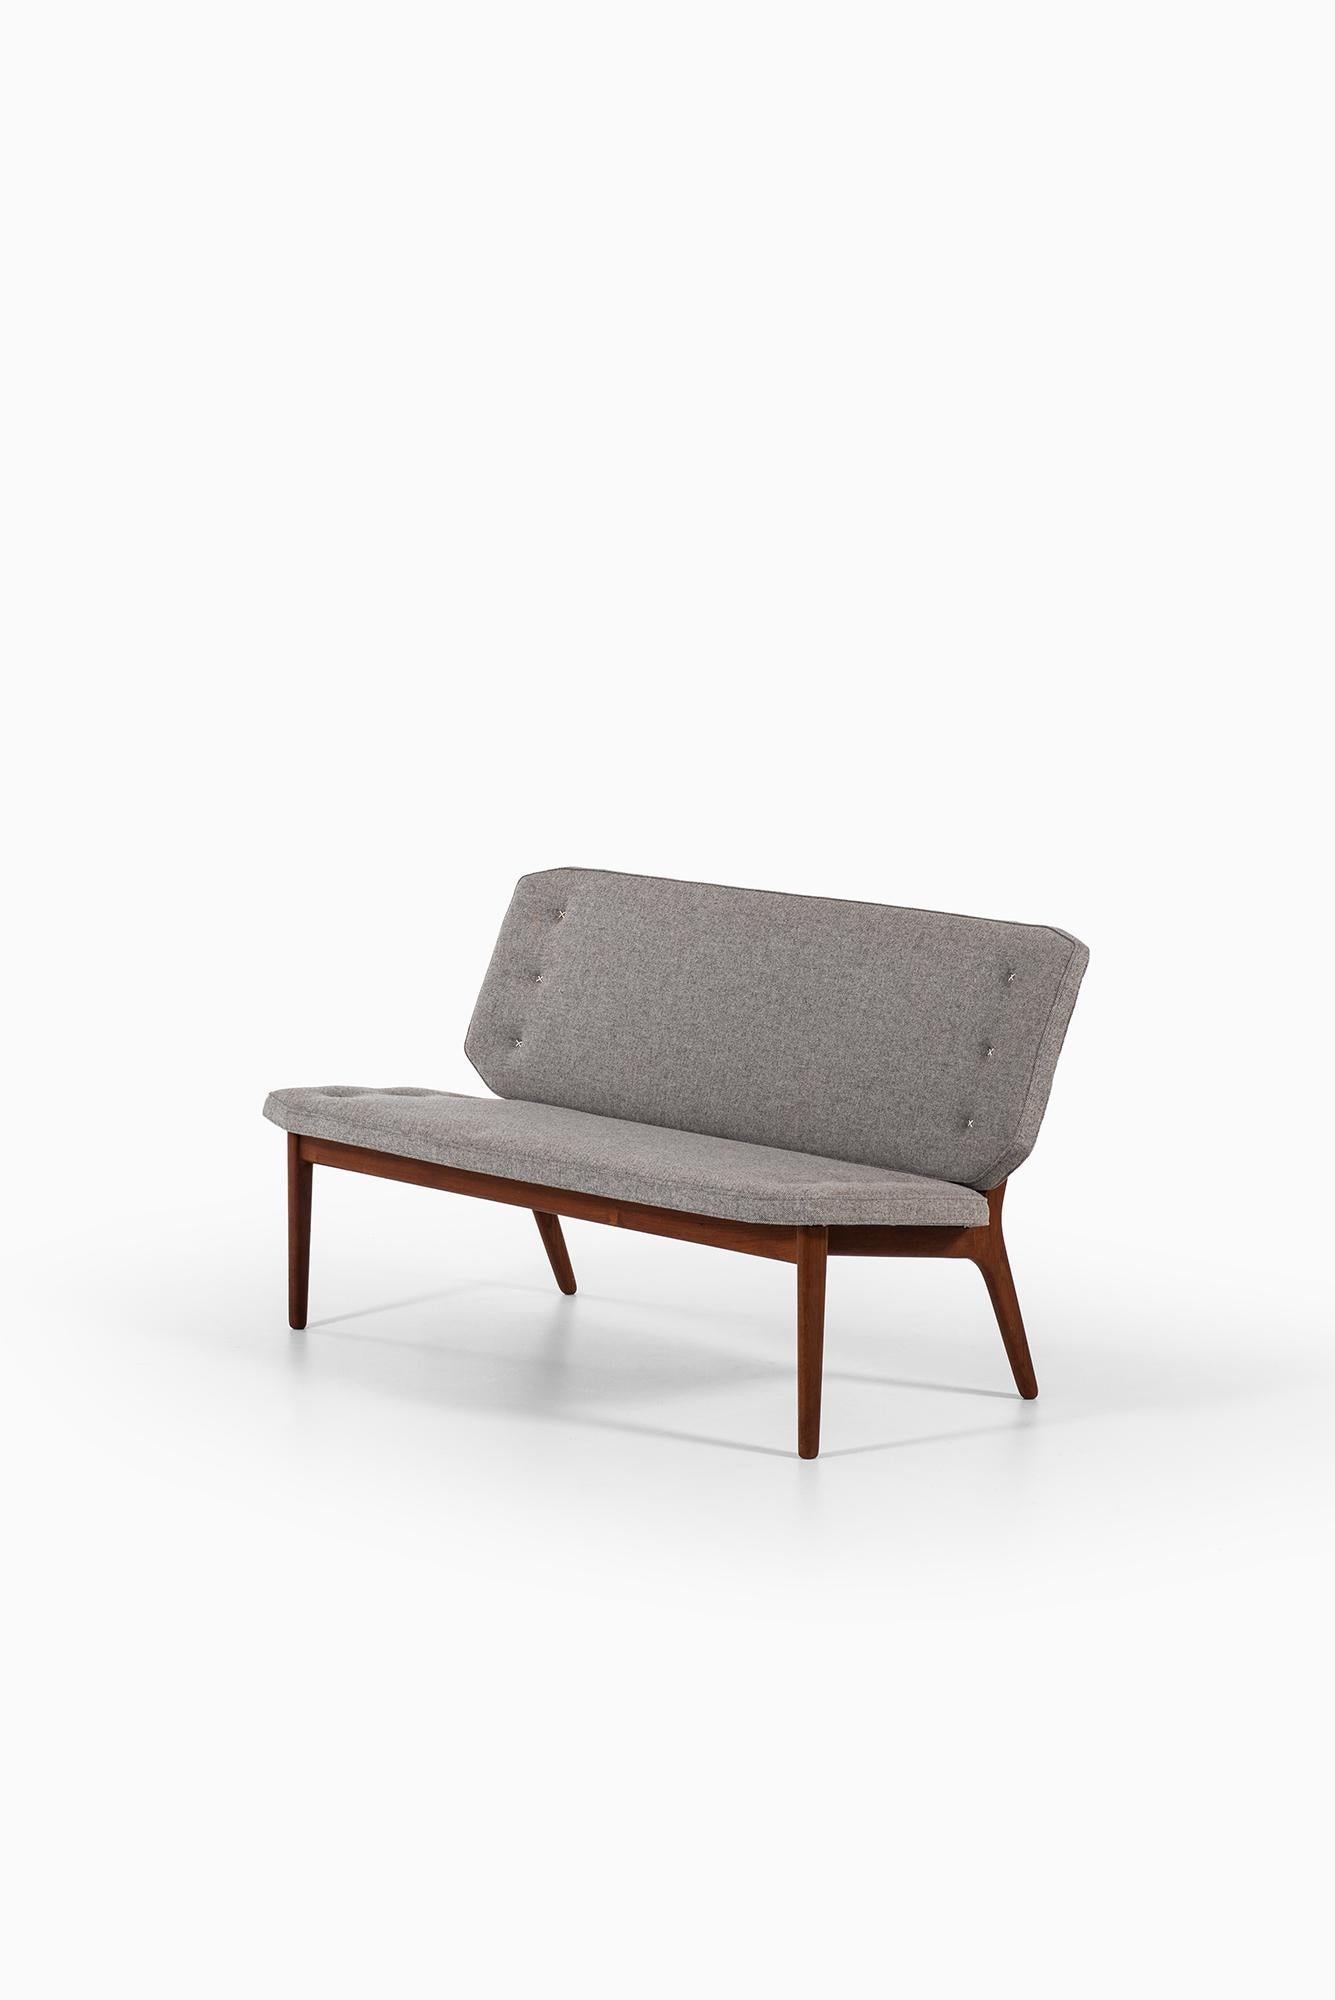 Danish Sofa in Teak and Grey Fabric Produced in Denmark For Sale